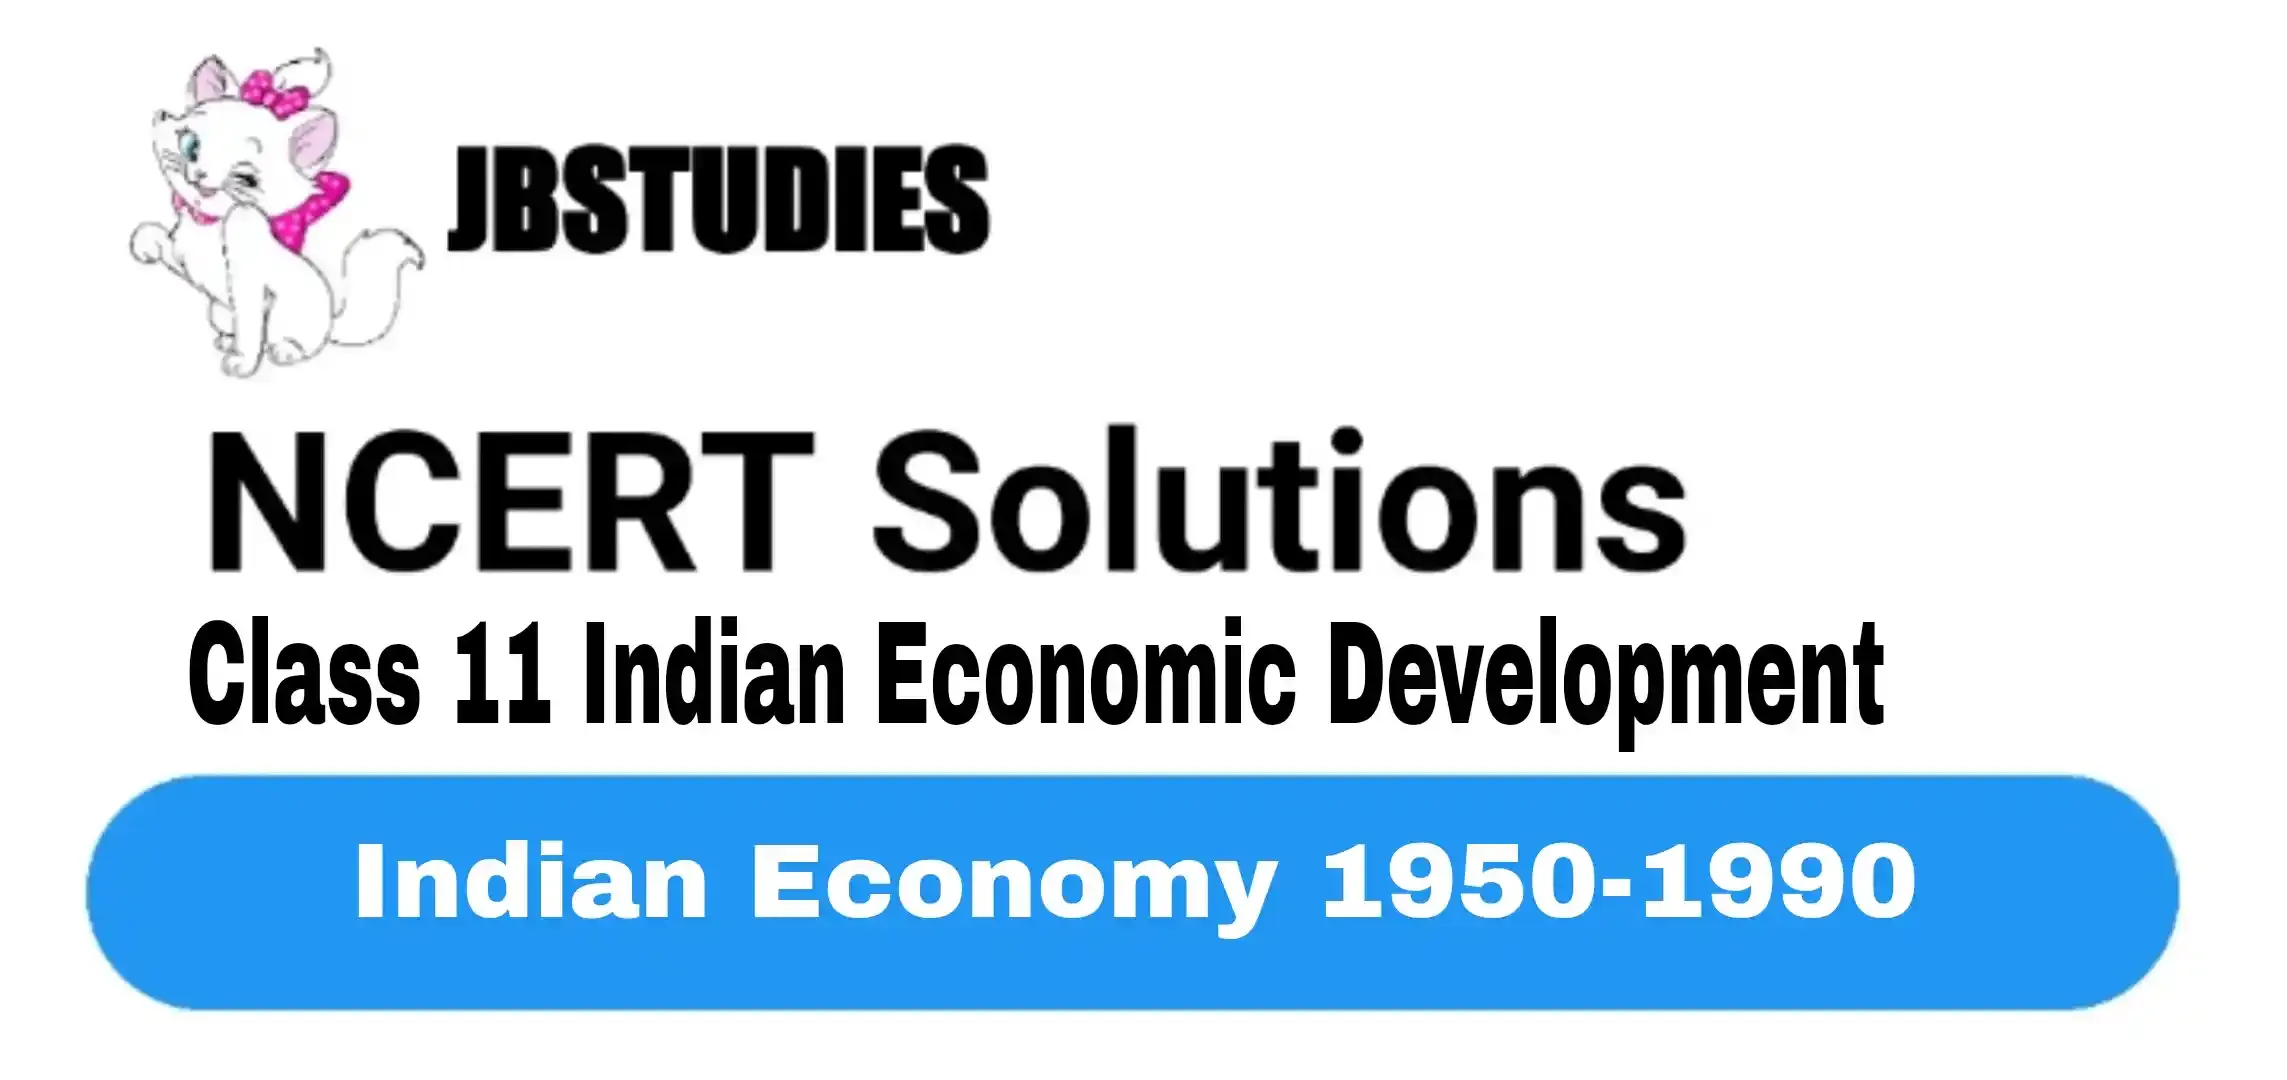 Solutions Class 11 Indian Economic Development Chapter -2 (Indian Economy 1950-1990)